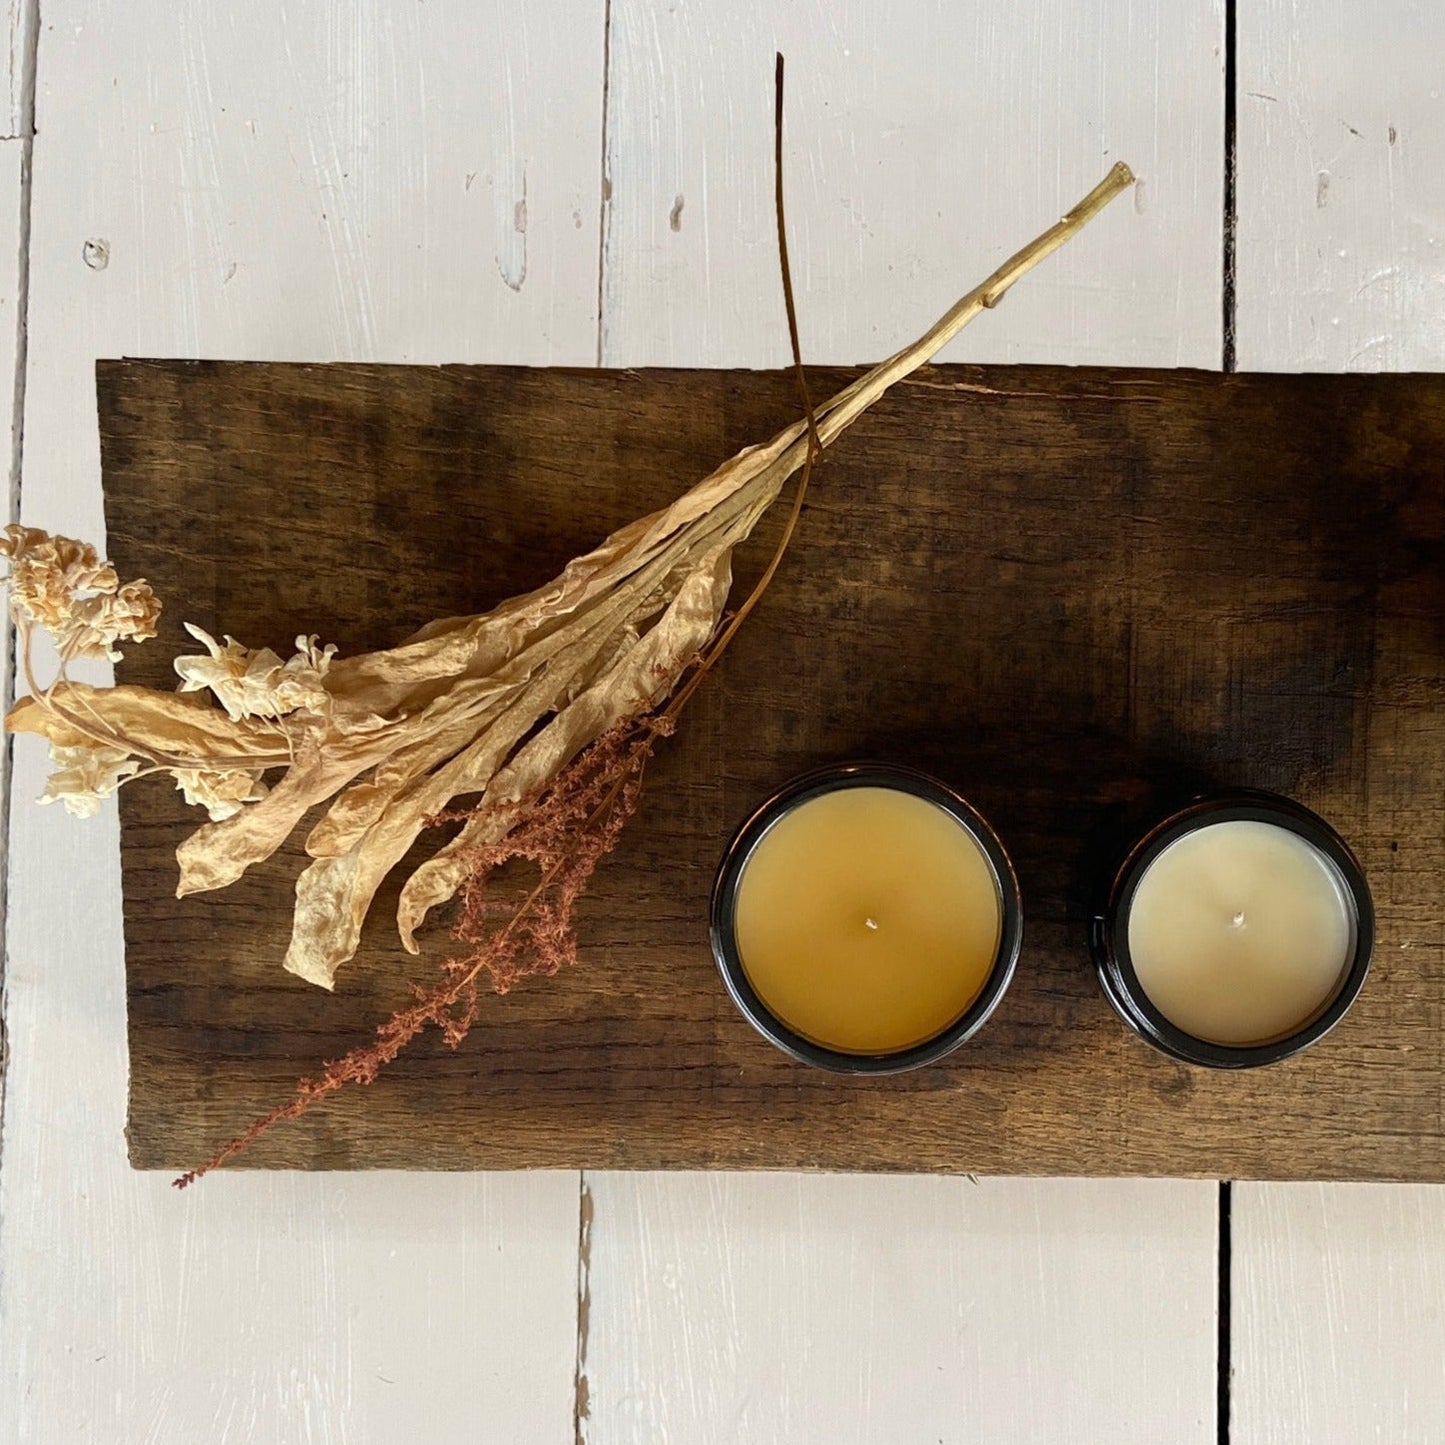 Brighton Essential Oil Mixology & Candle Making Workshop | Wednesday 8th May, 7:00pm